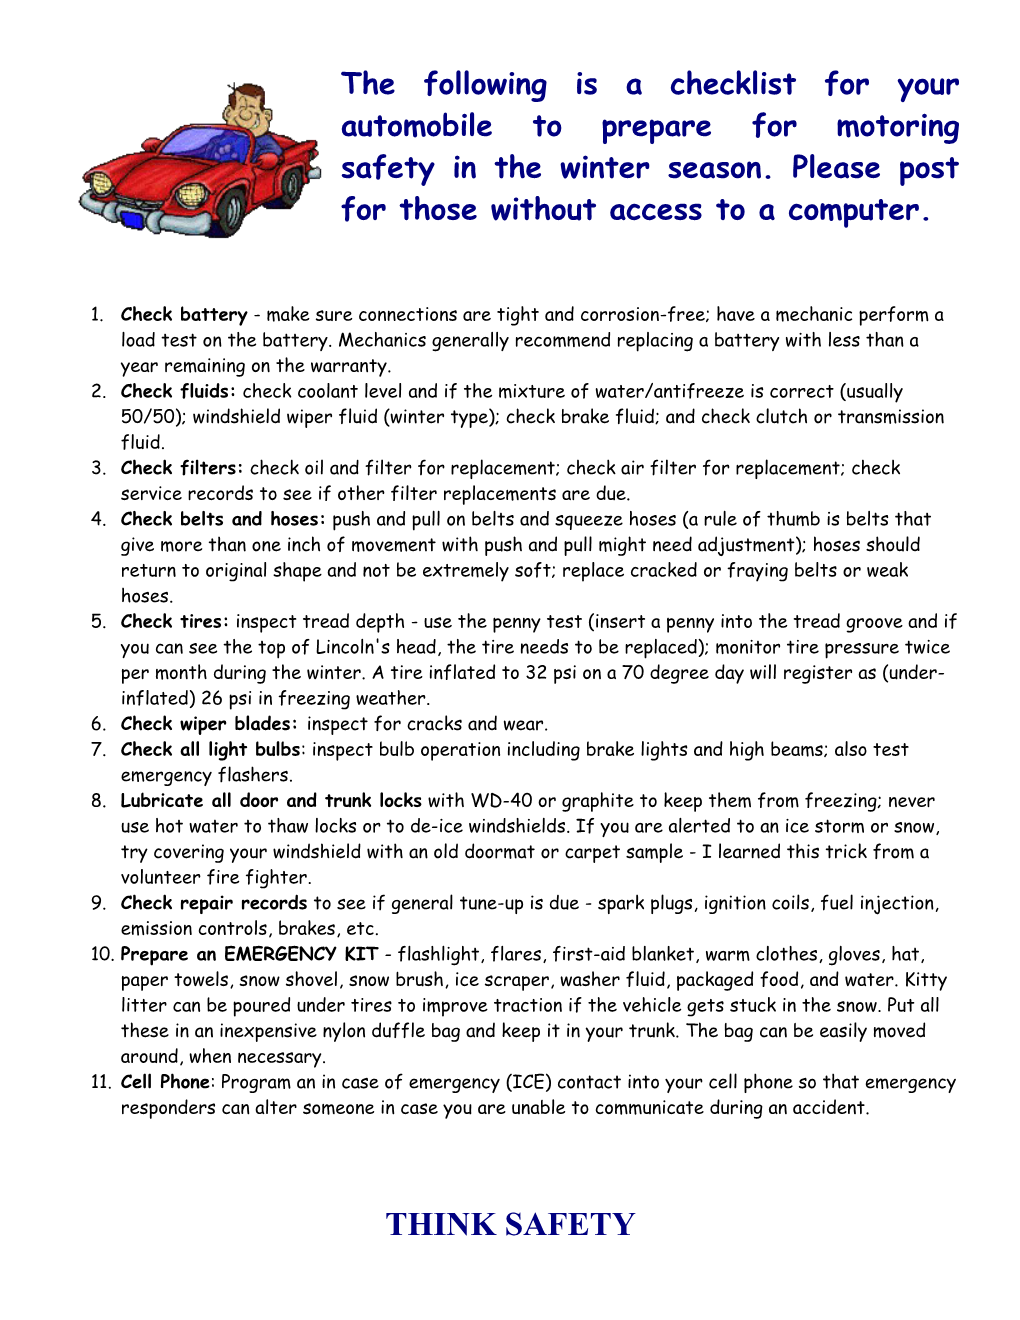 The Following Is a Checklist for Your Automobile to Prepare for Motoring Safety in The